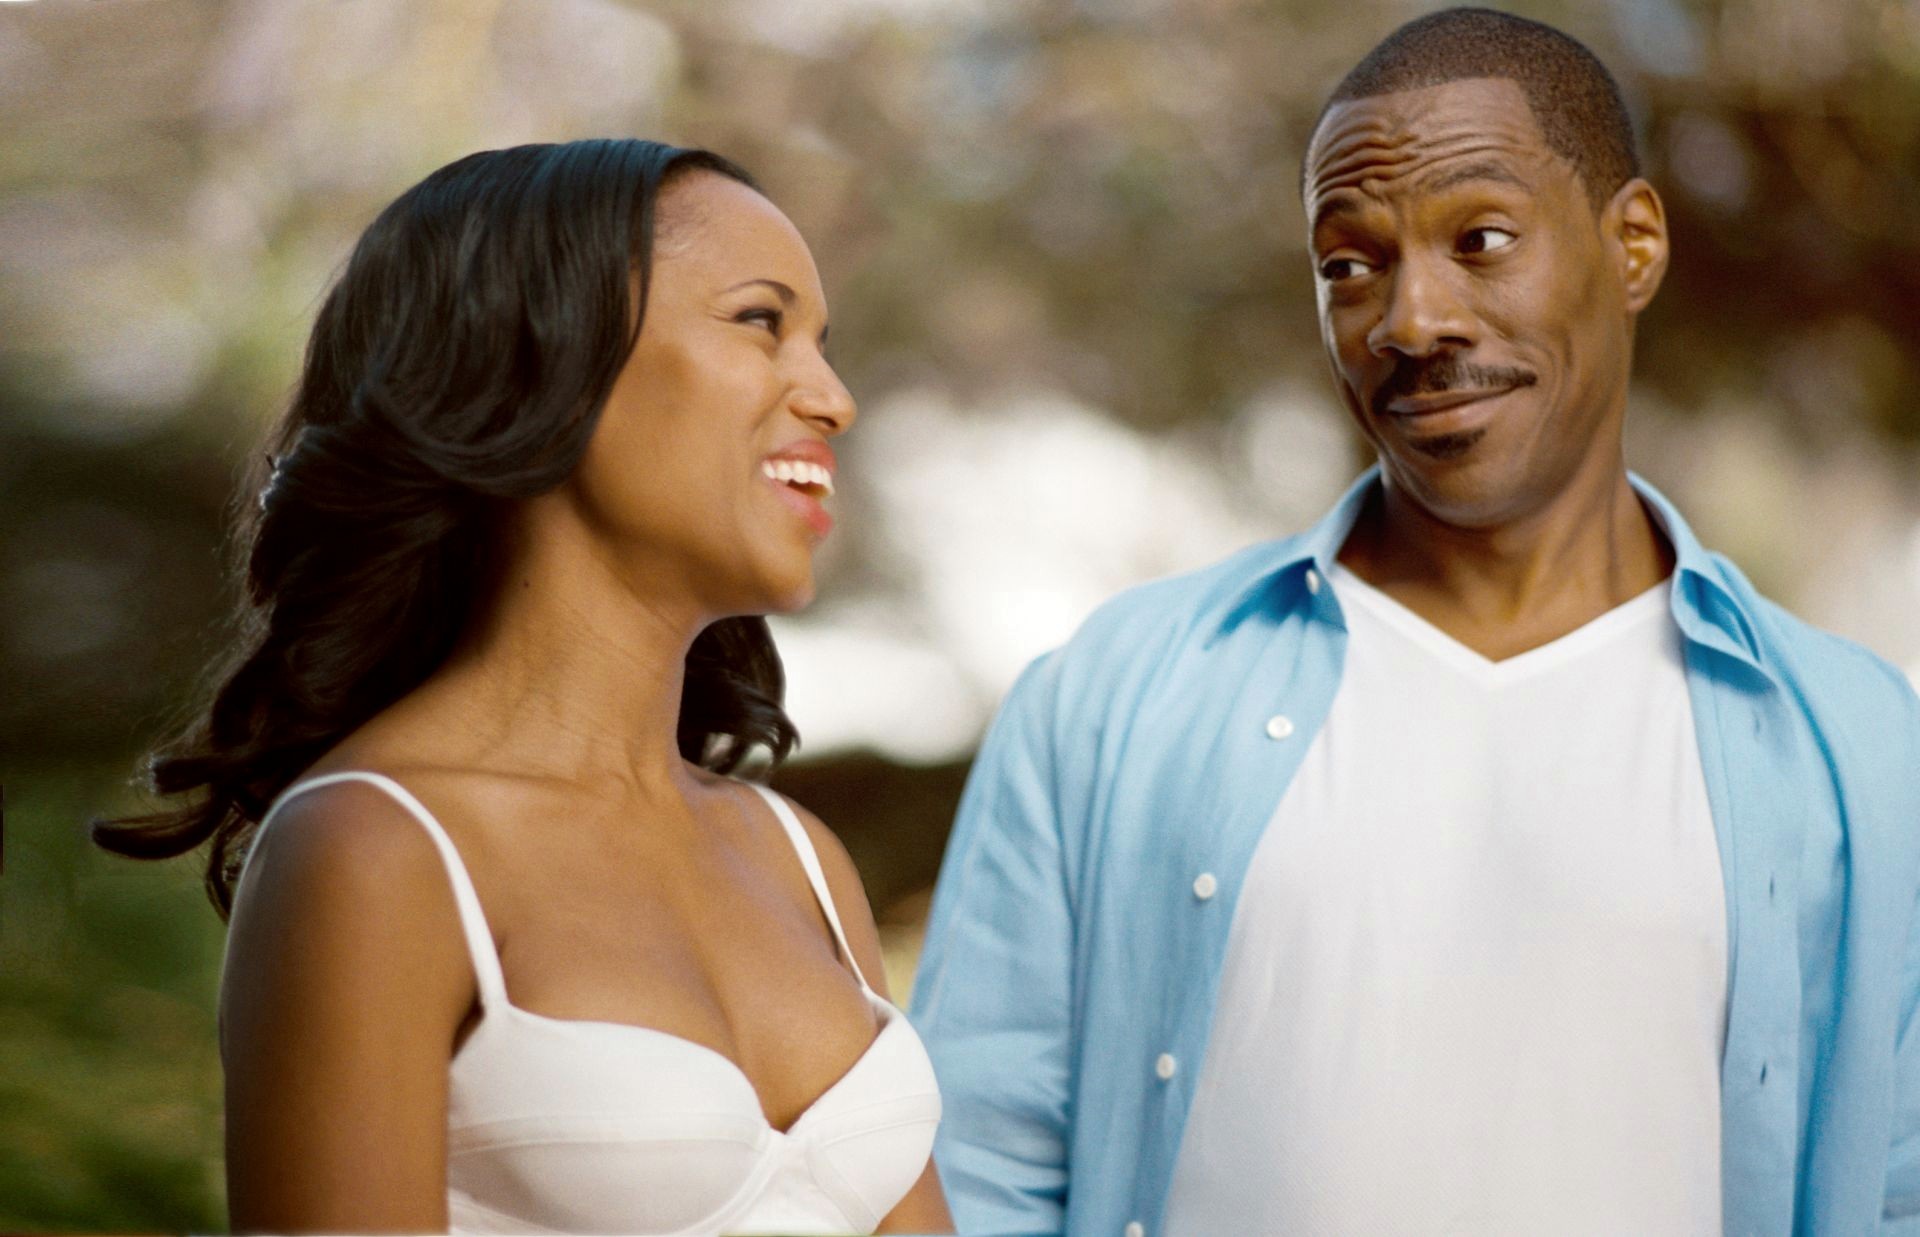 Kerry Washington stars as Caroline McCall and Eddie Murphy stars as Jack McCall in DreamWorks SKG's A Thousand Words (2012). Photo credit by Bruce McBroom.